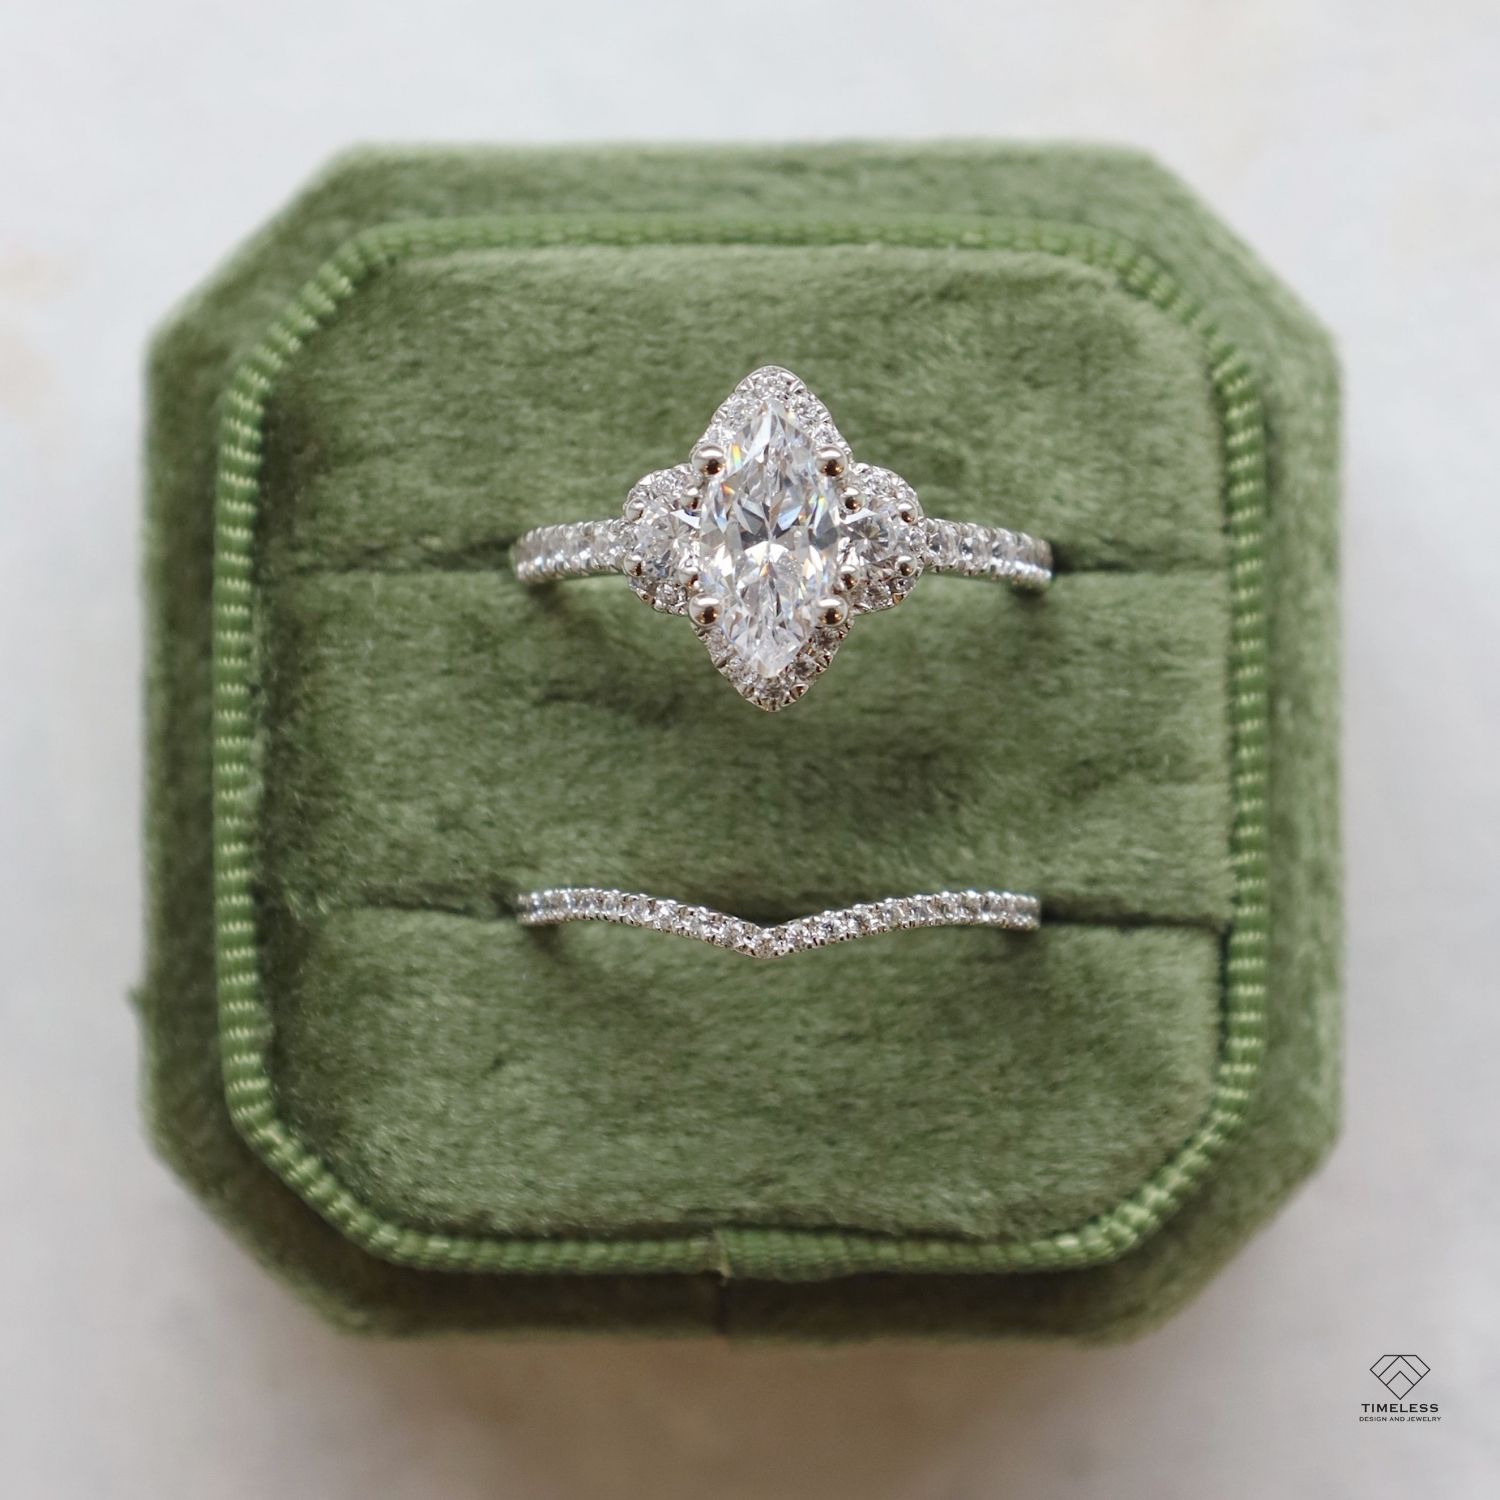 Custom Engagement Ring Set in Salt Lake City by Timeless Design and Jewelry